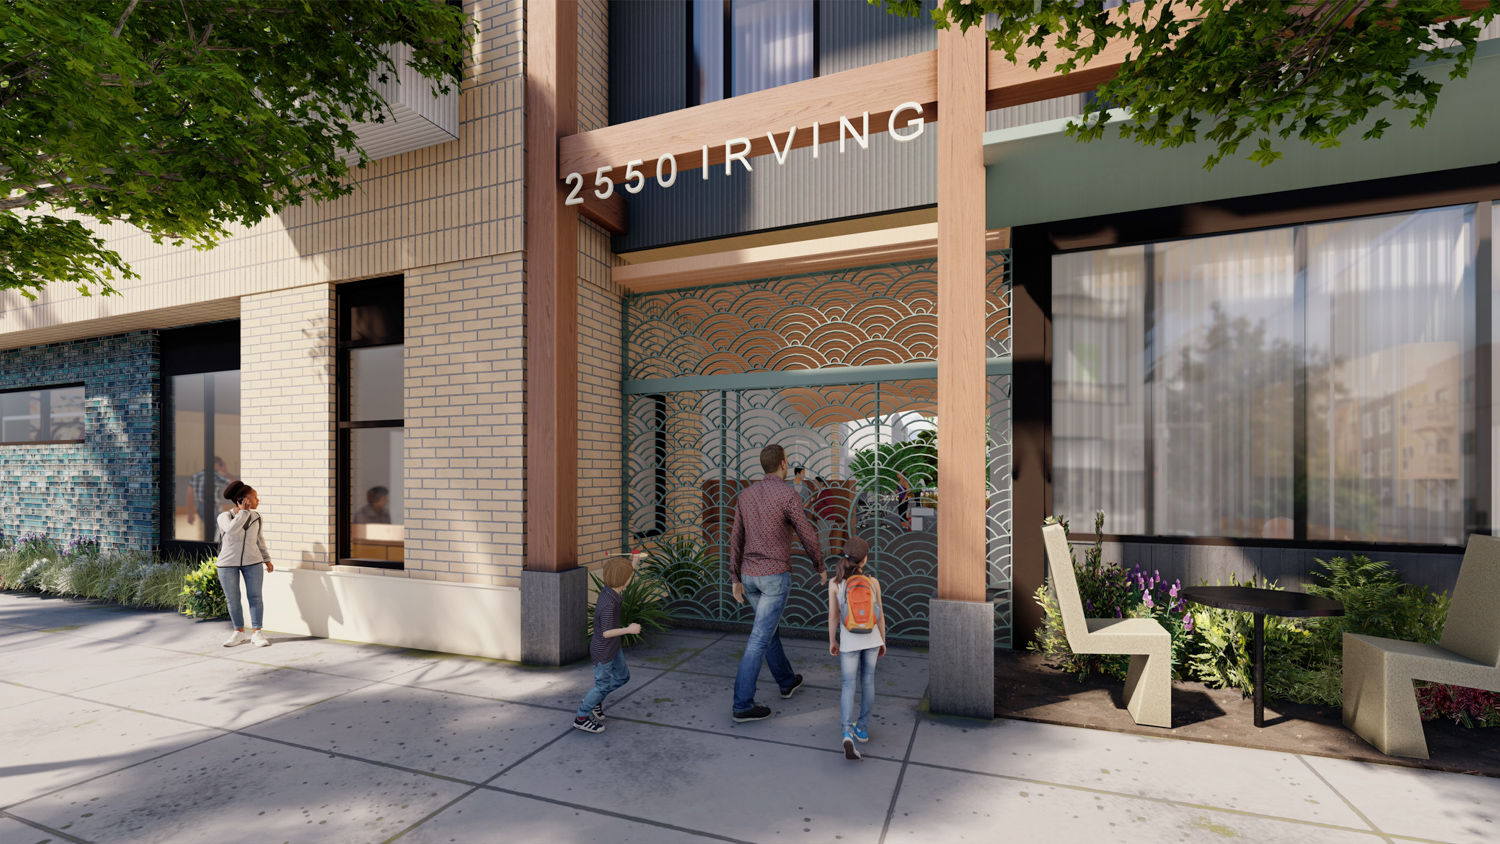 2550 Irving Street entry gate along Irving, rendering by Pyatok Architects